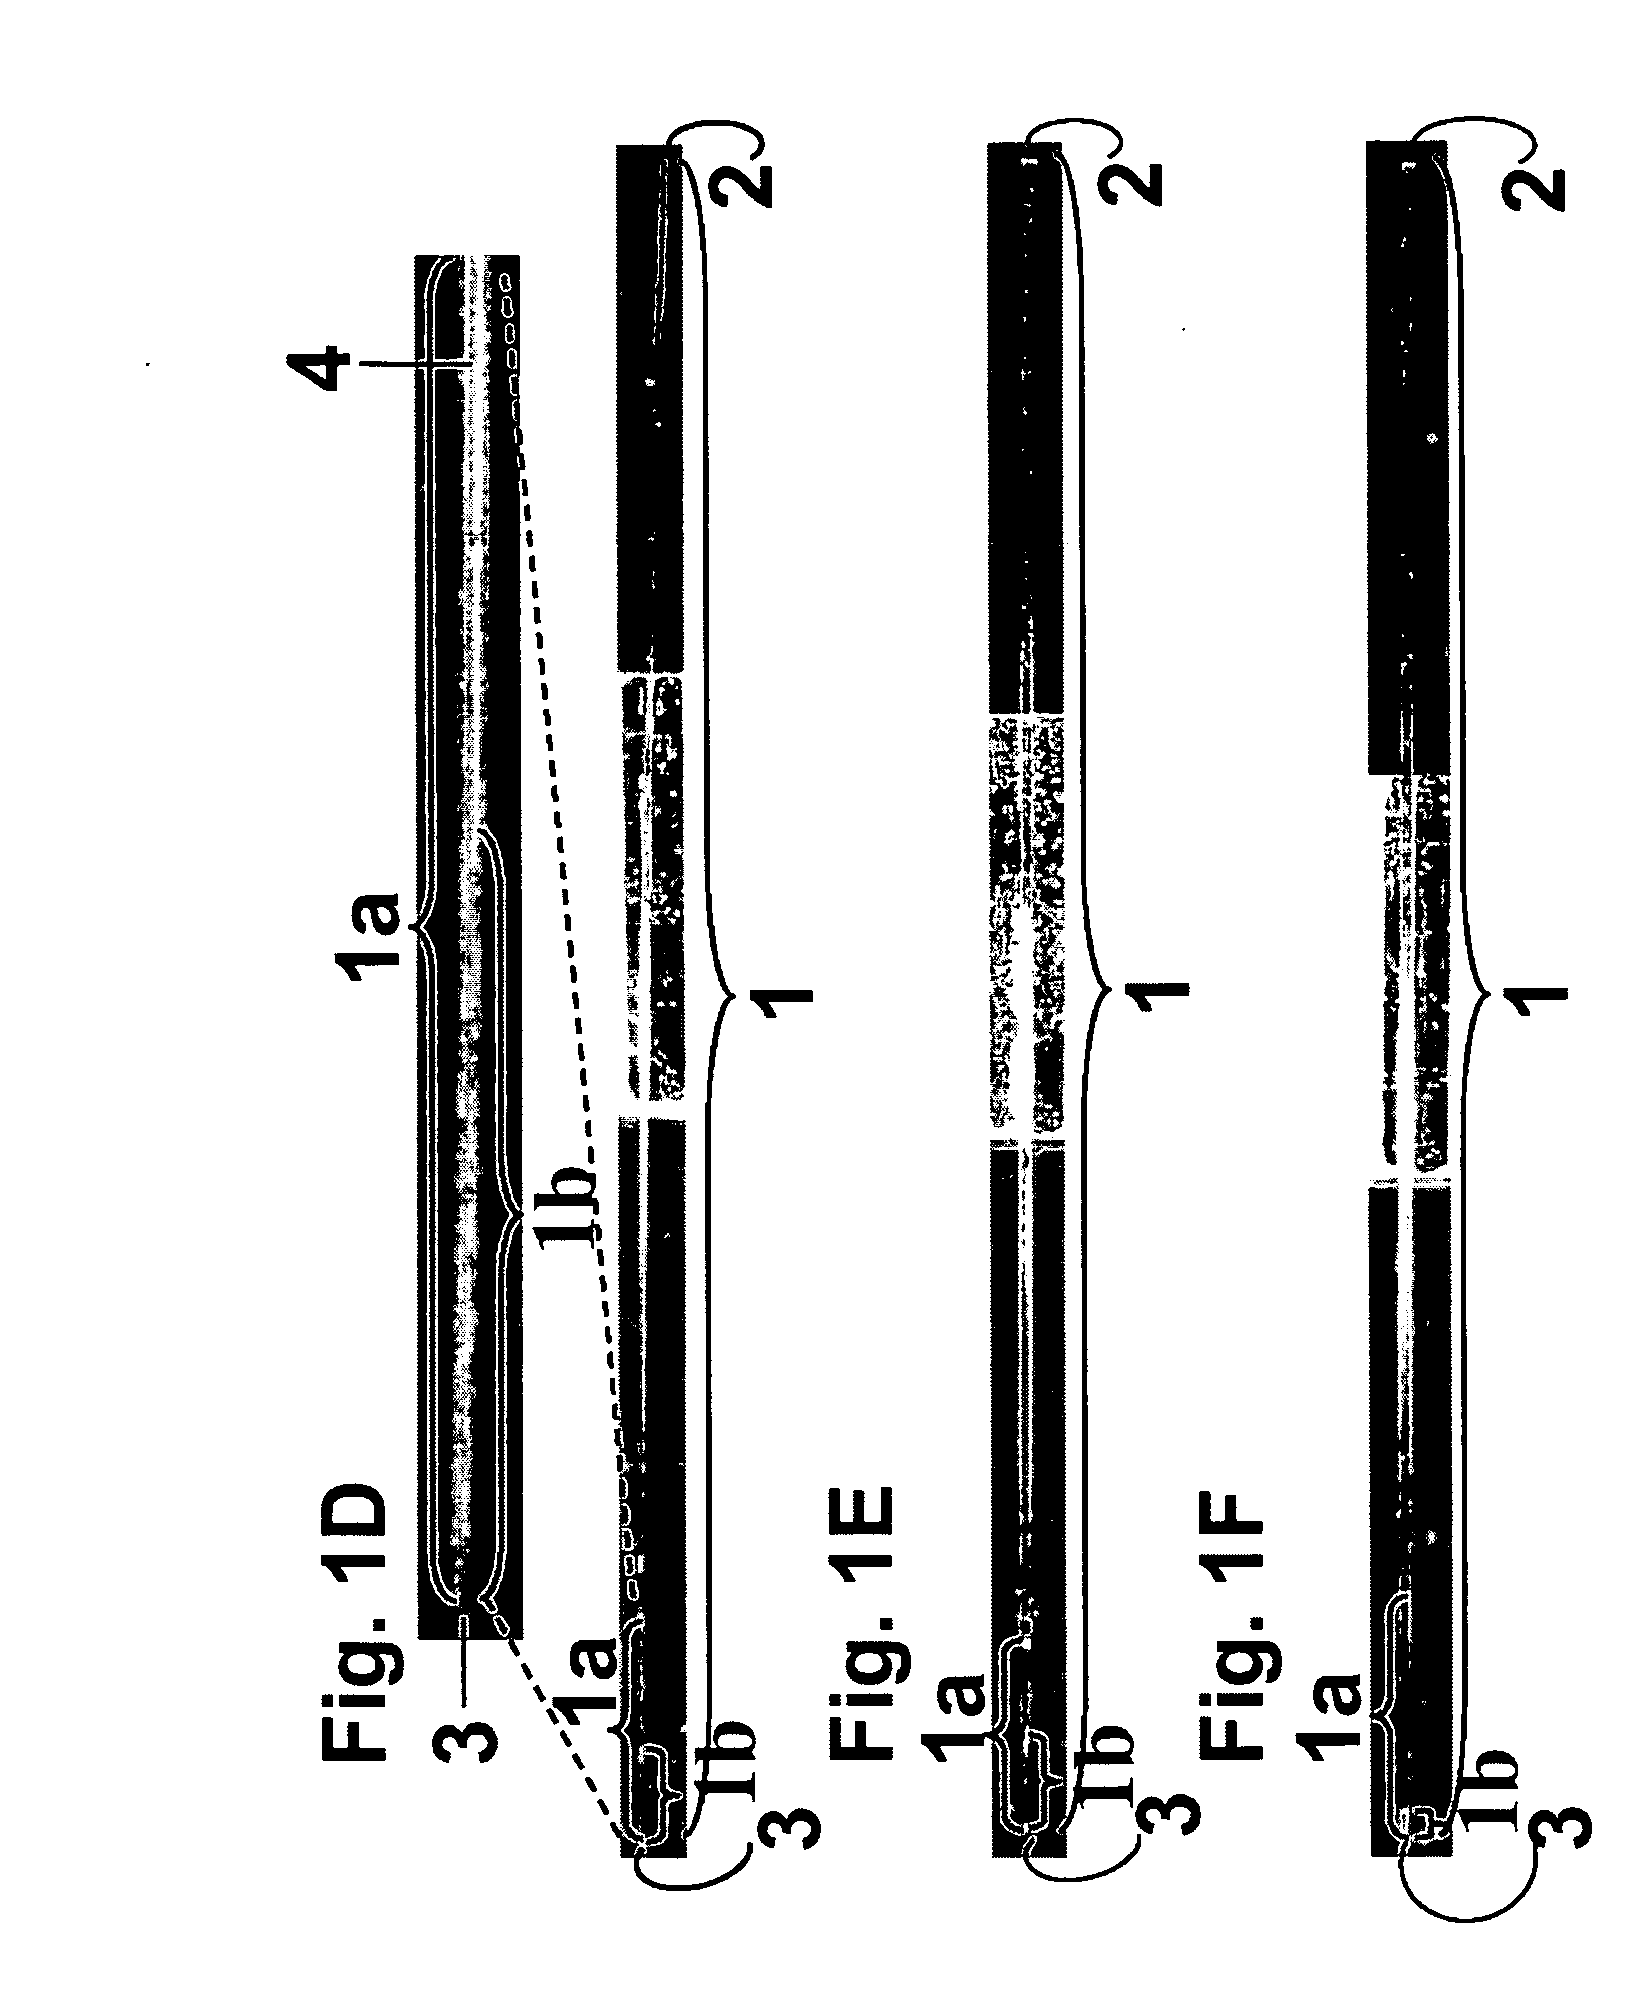 Electrospray emitter coated with material of low surface energy